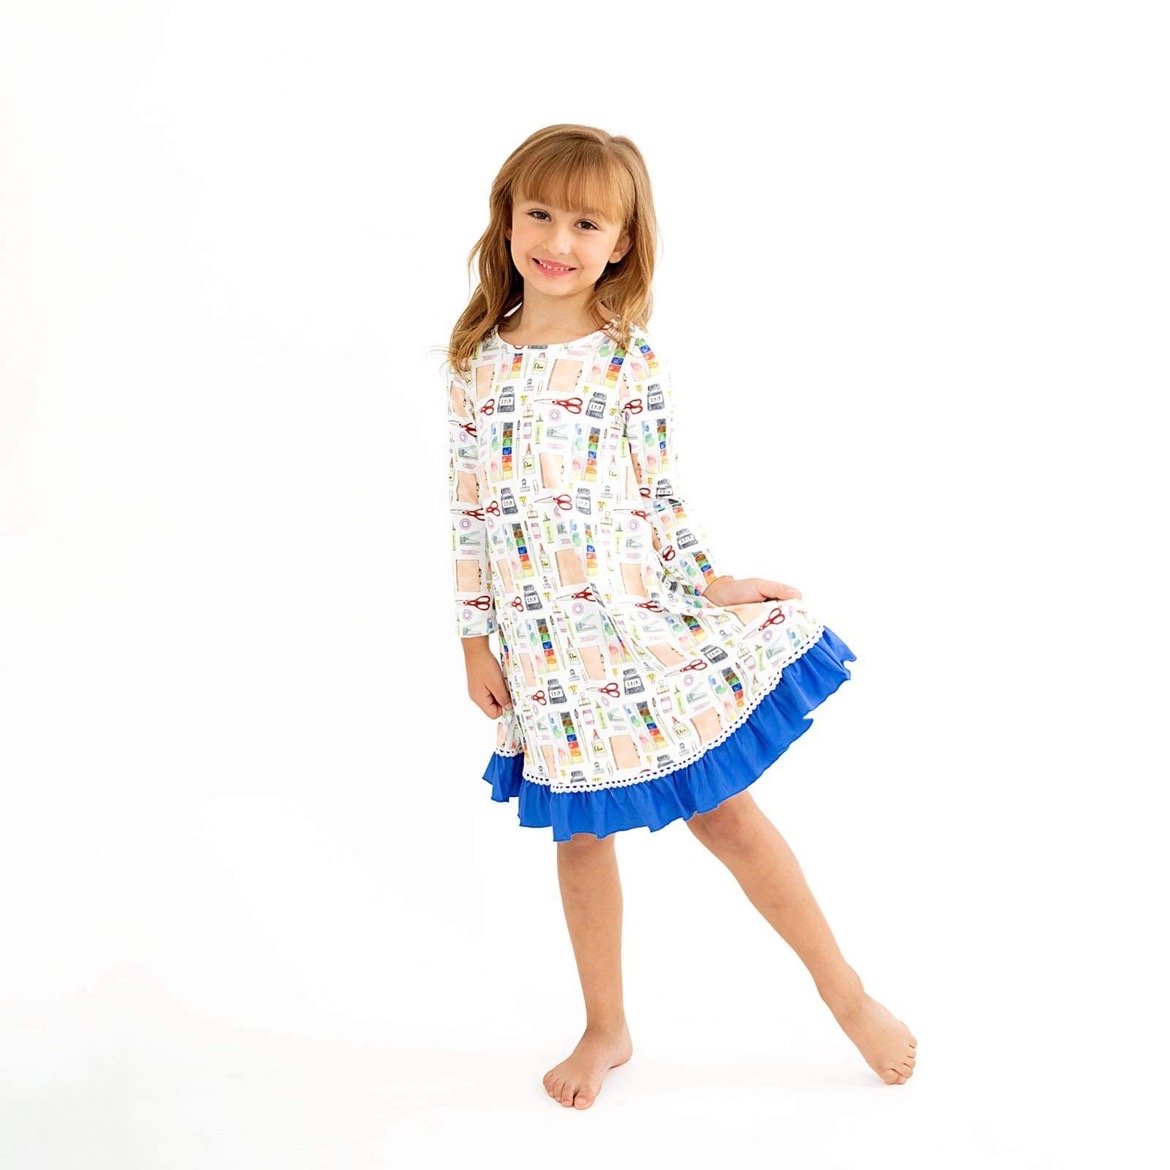 SCHOOL SUPPLIES GOWN - Evie's Closet Clothing